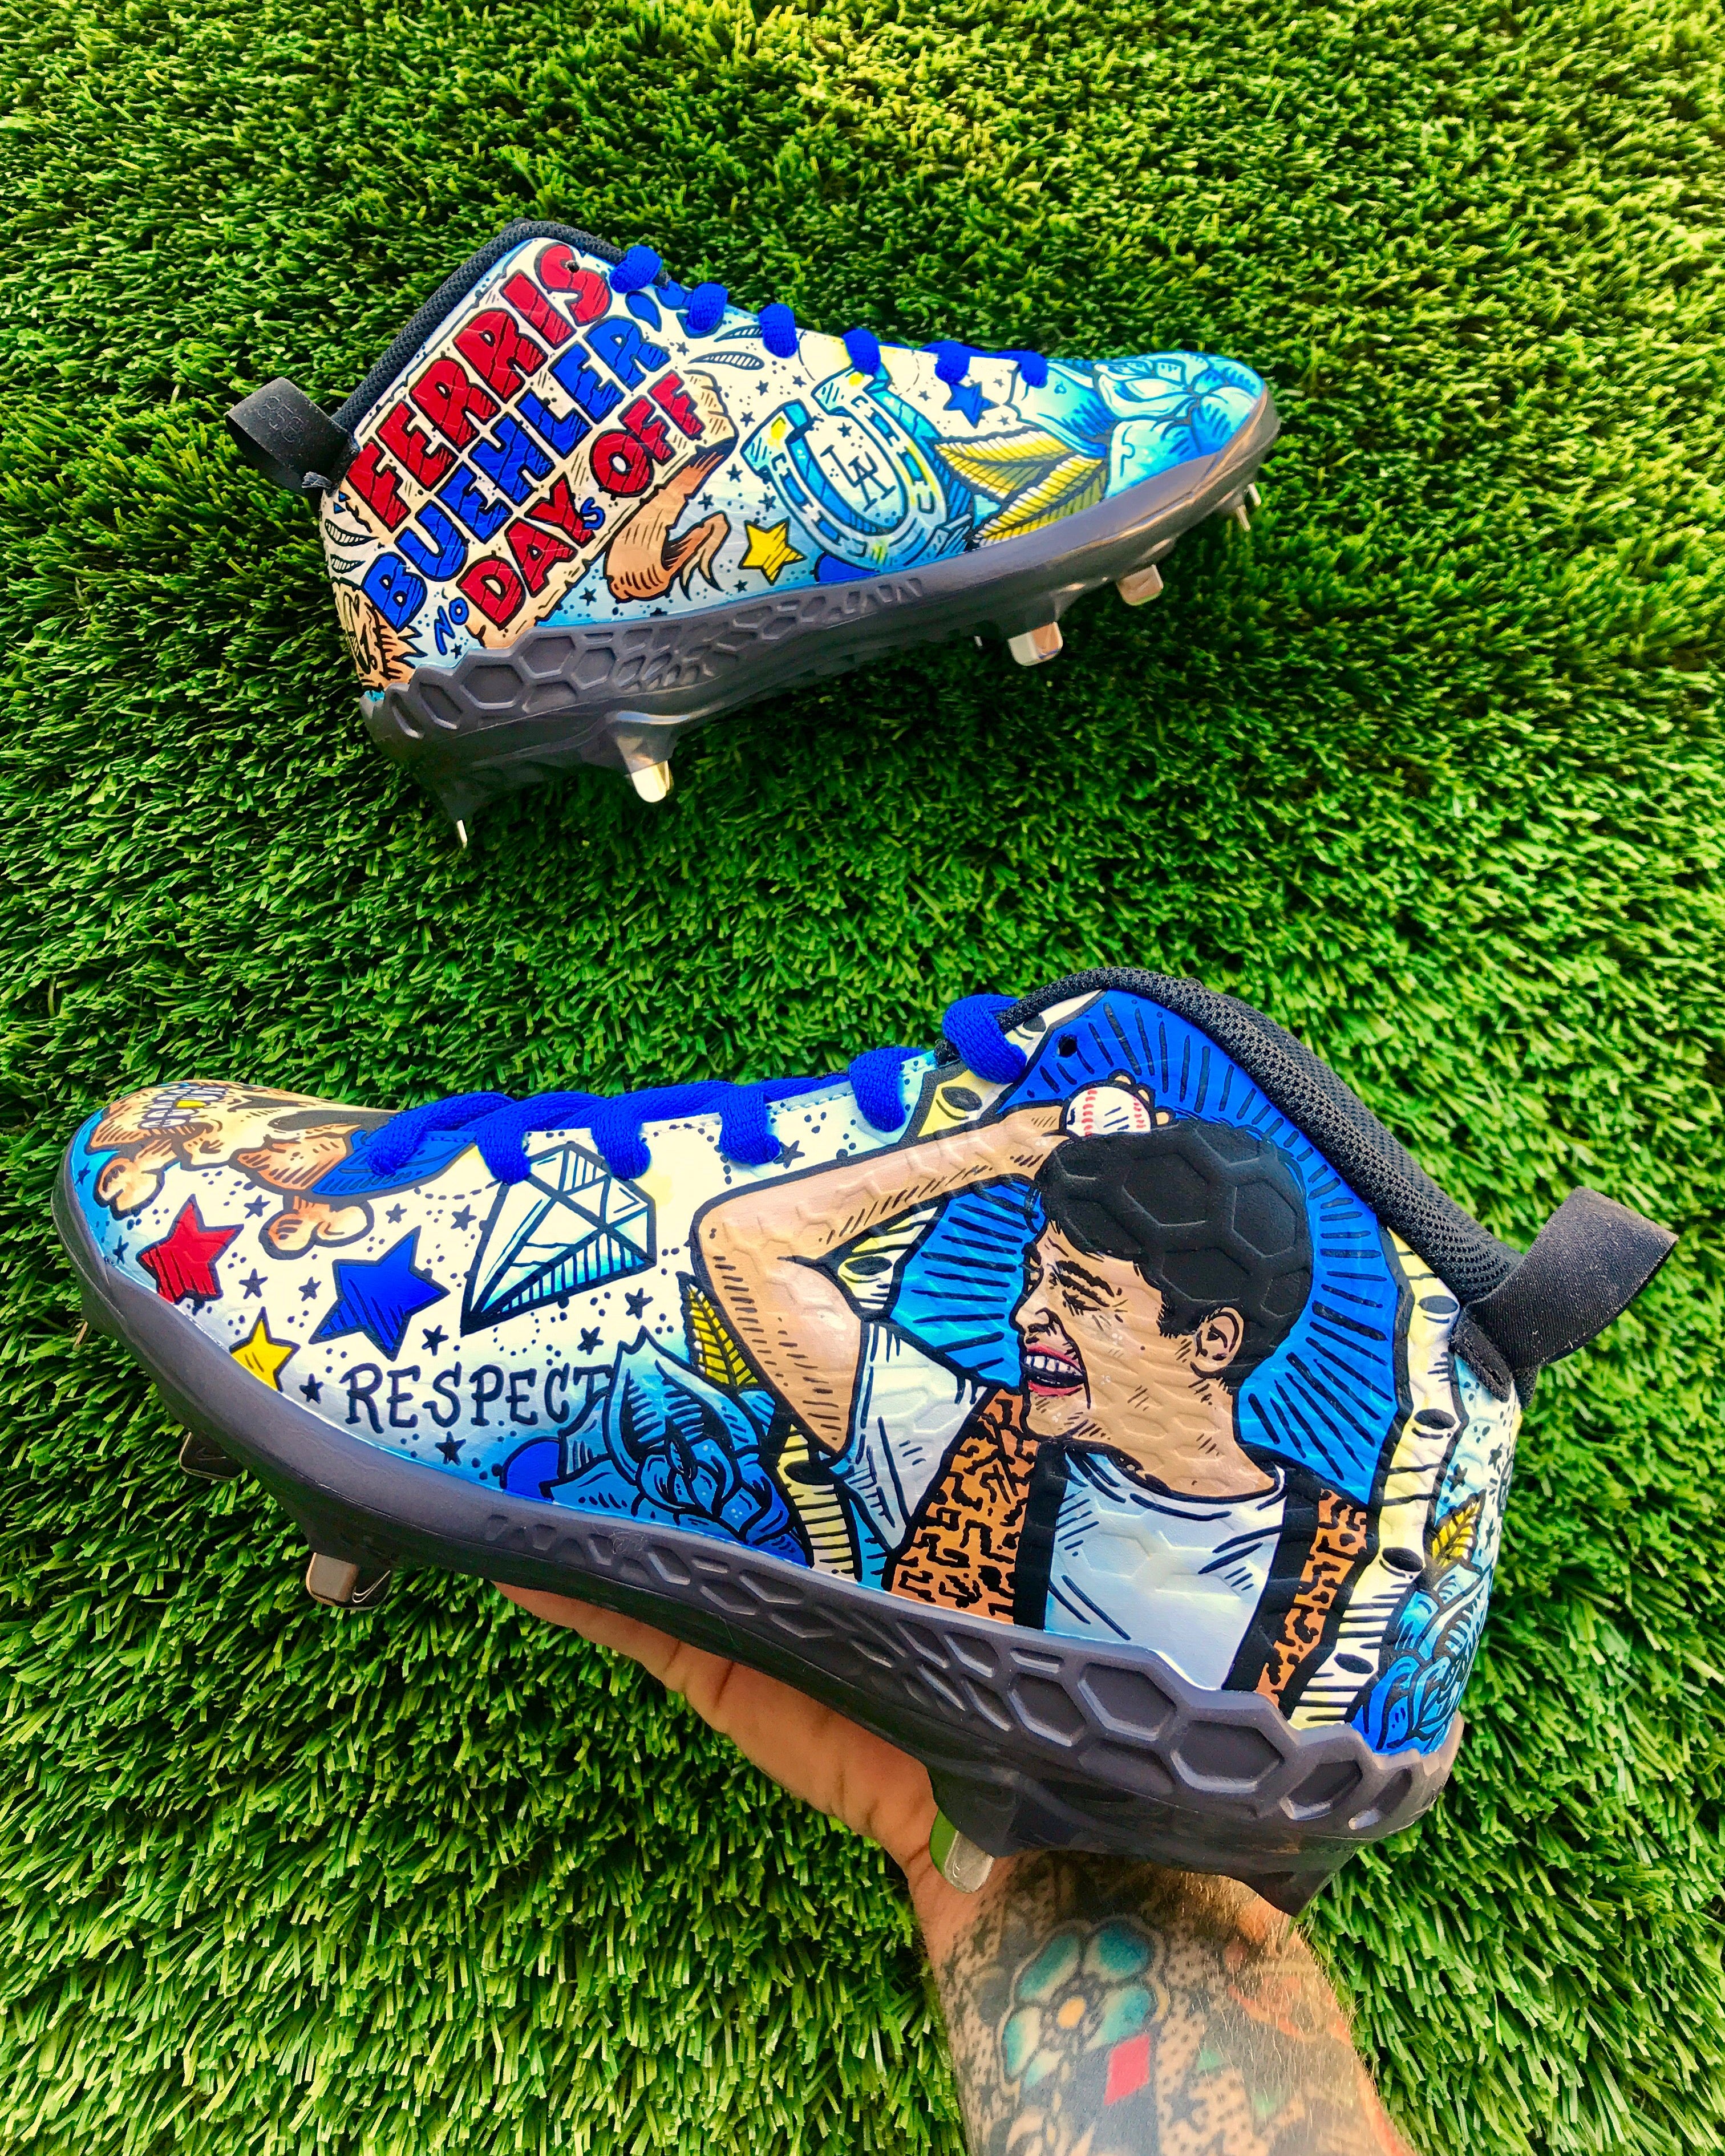 LA Dodgers Walker Buehler's Day Off - Nike Baseball Cleat shoes –  chadcantcolor